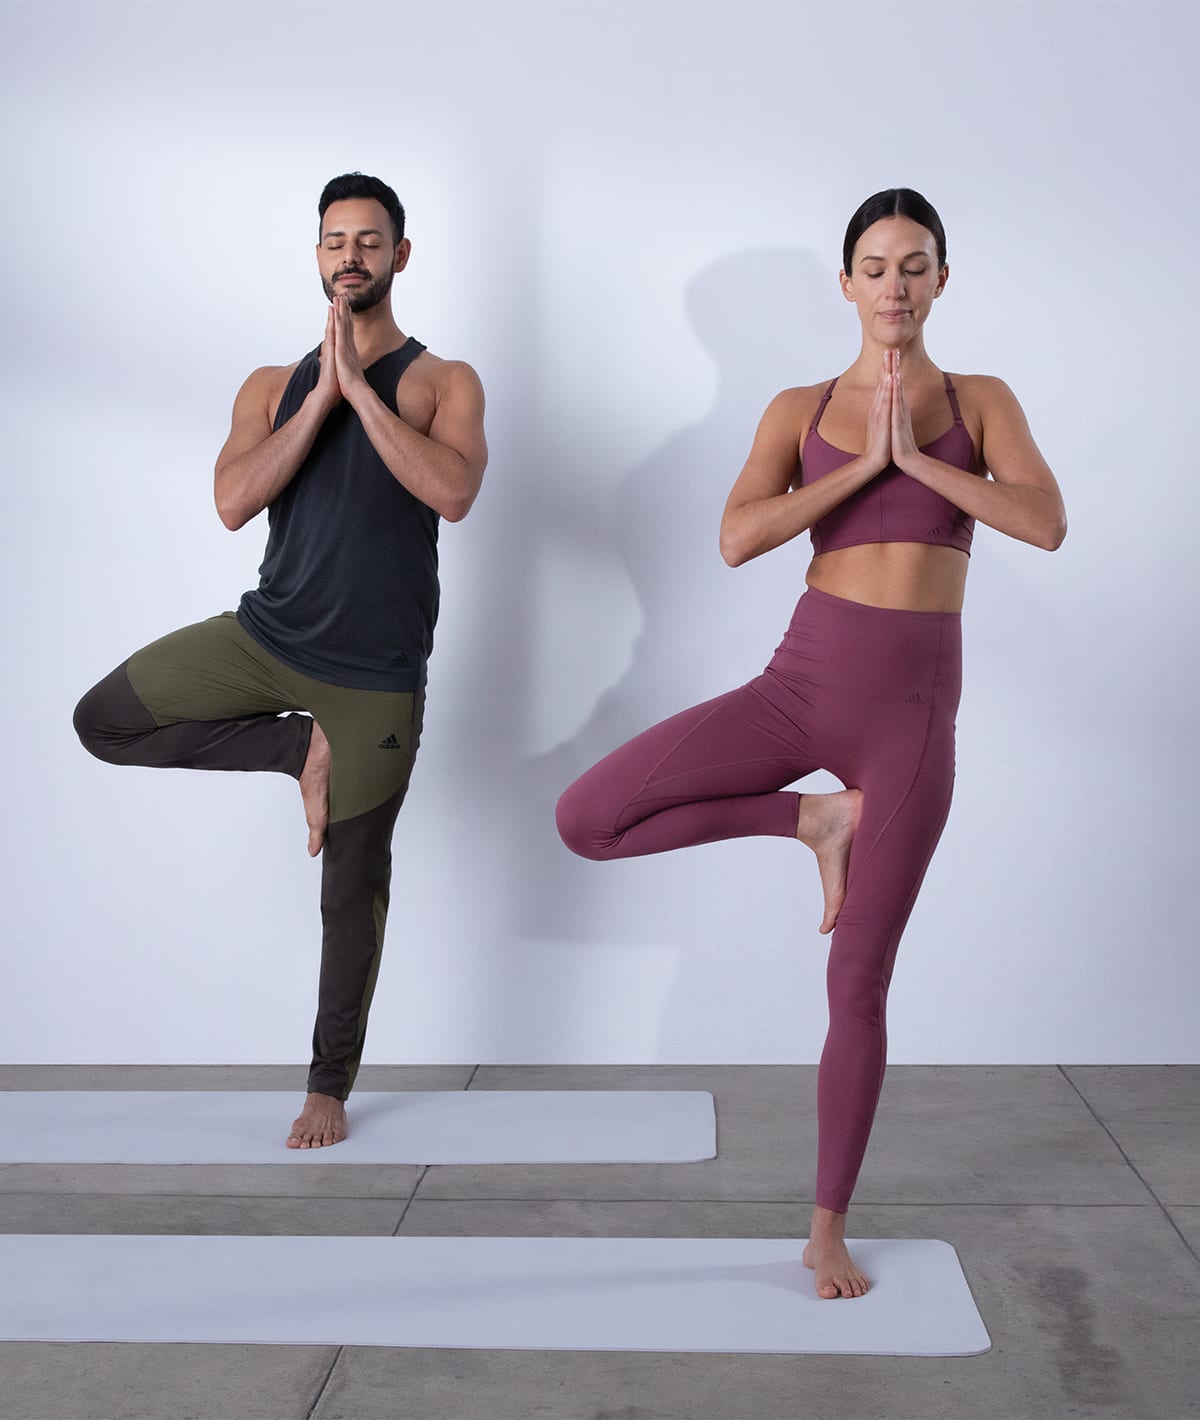 What Kind of Clothes Should You Wear For Yoga?